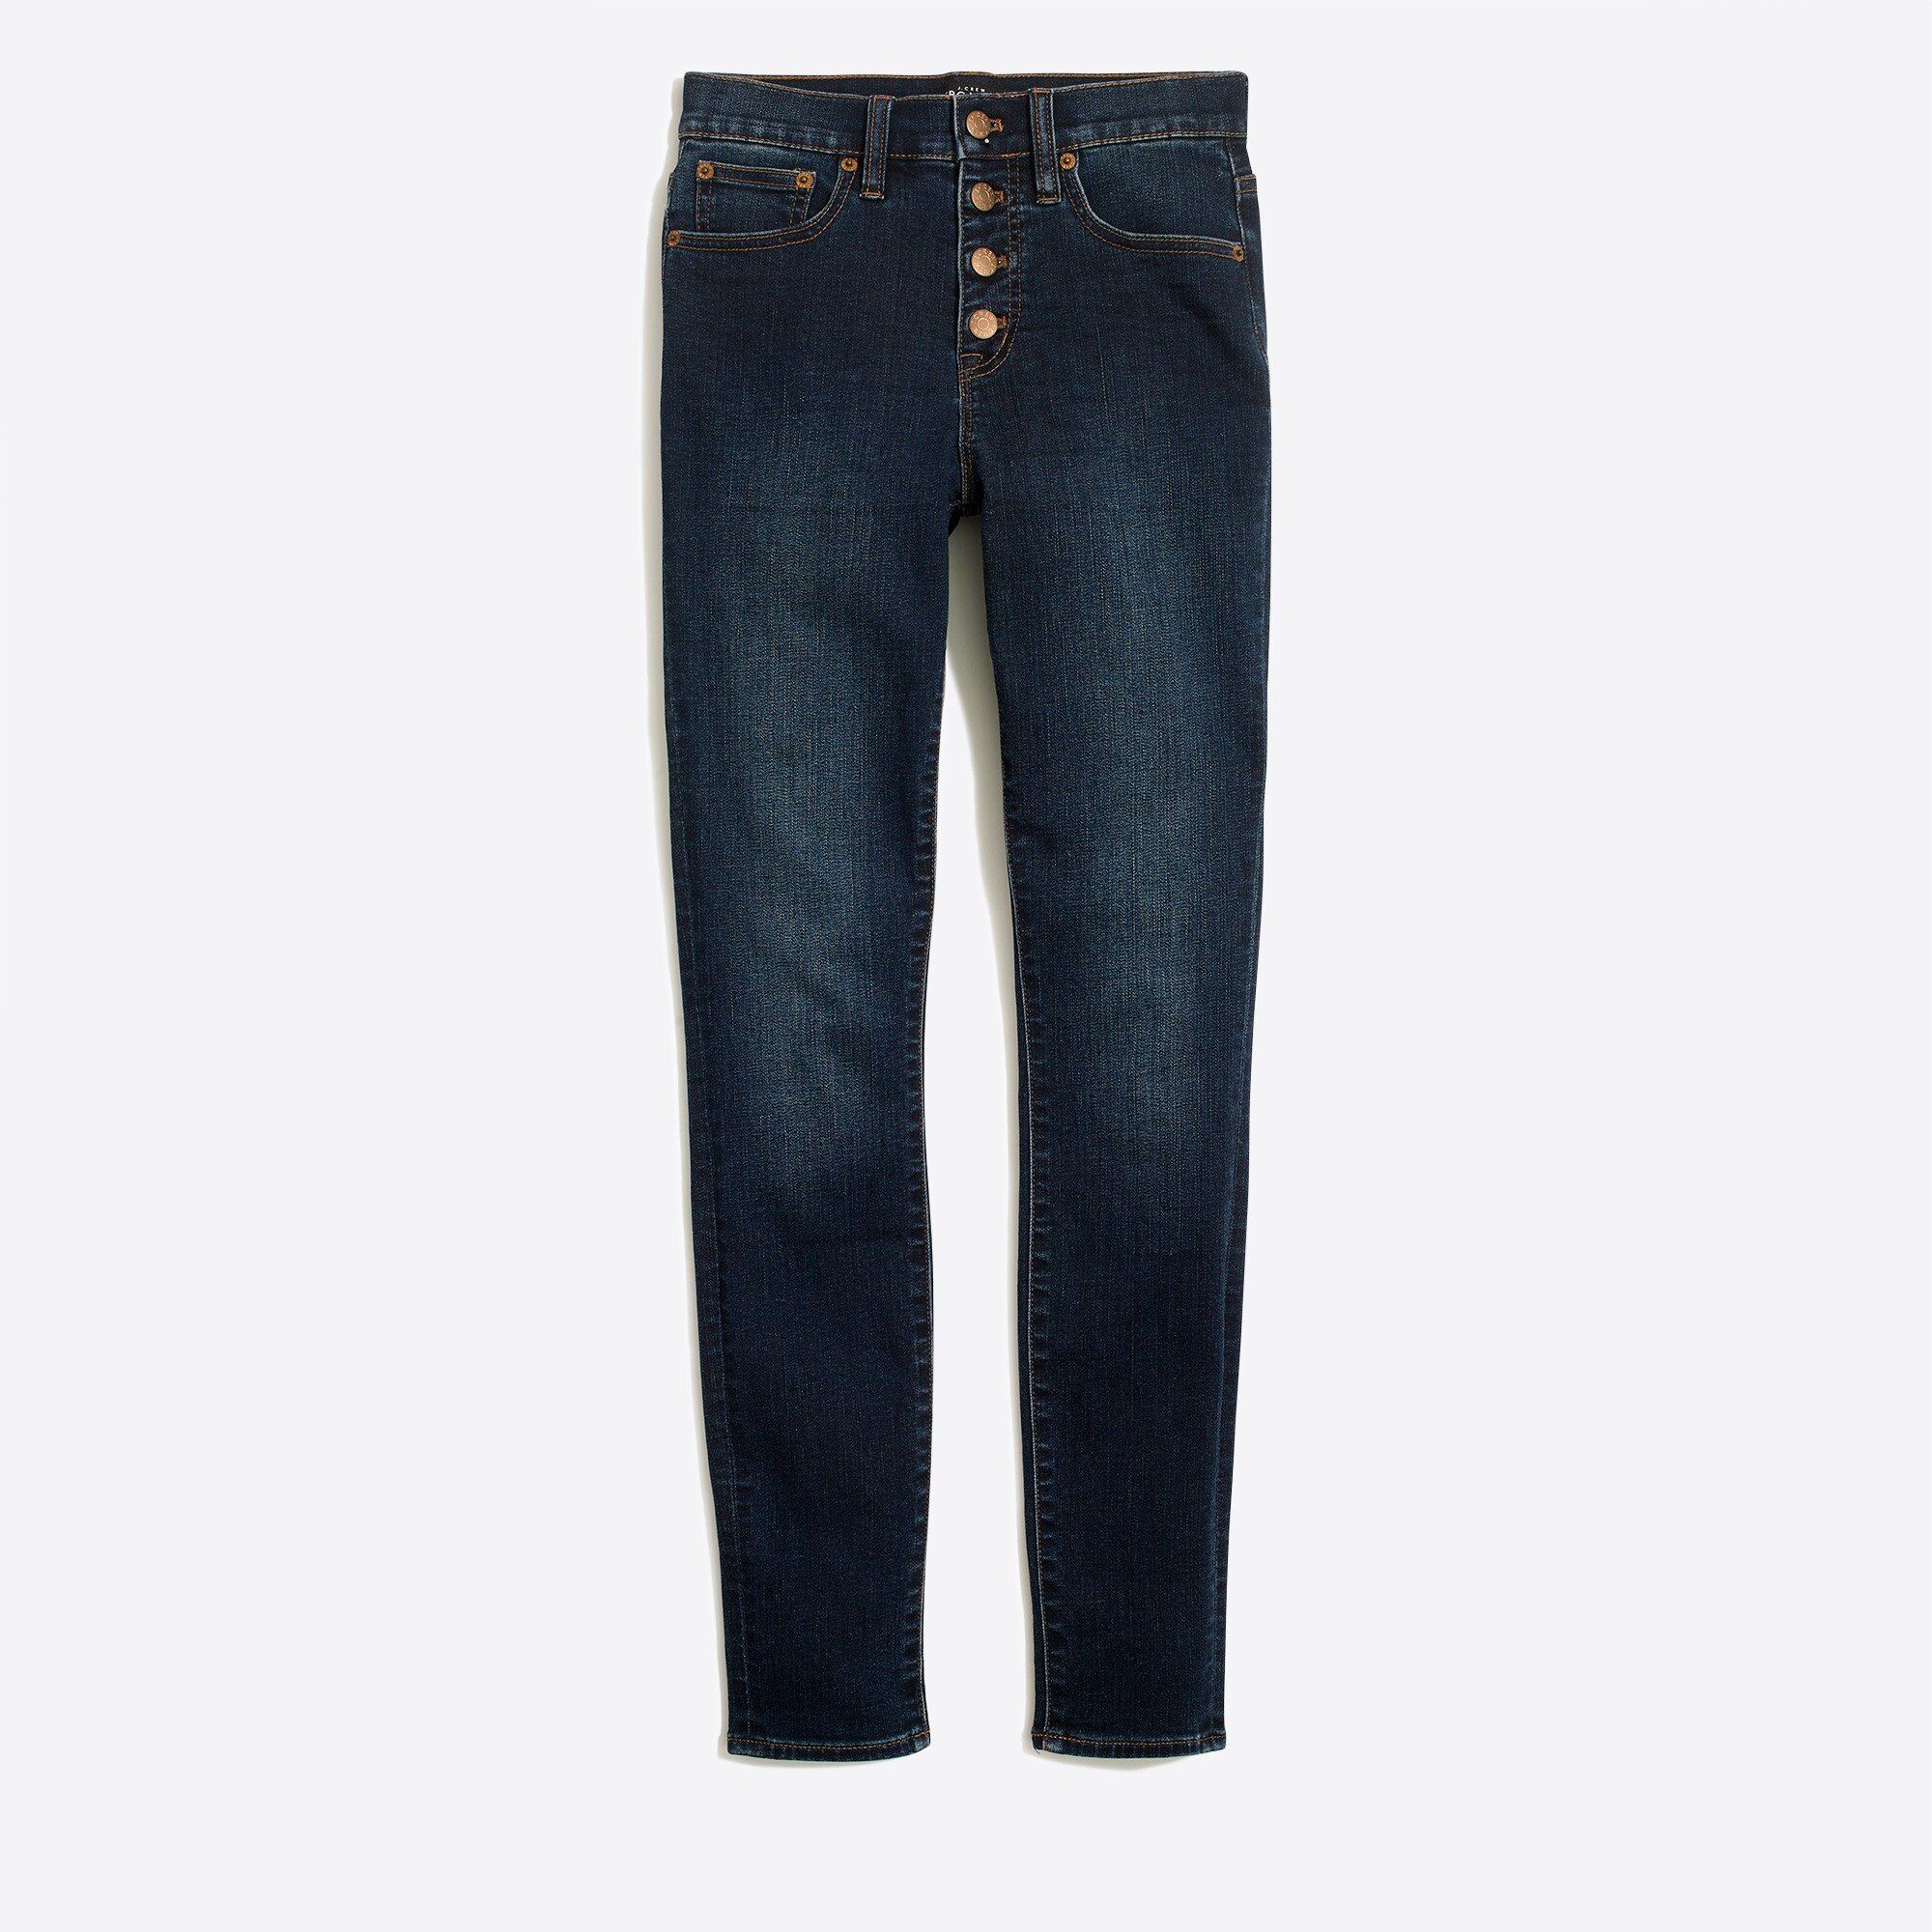 9" high-rise skinny jean with button fly | J.Crew Factory